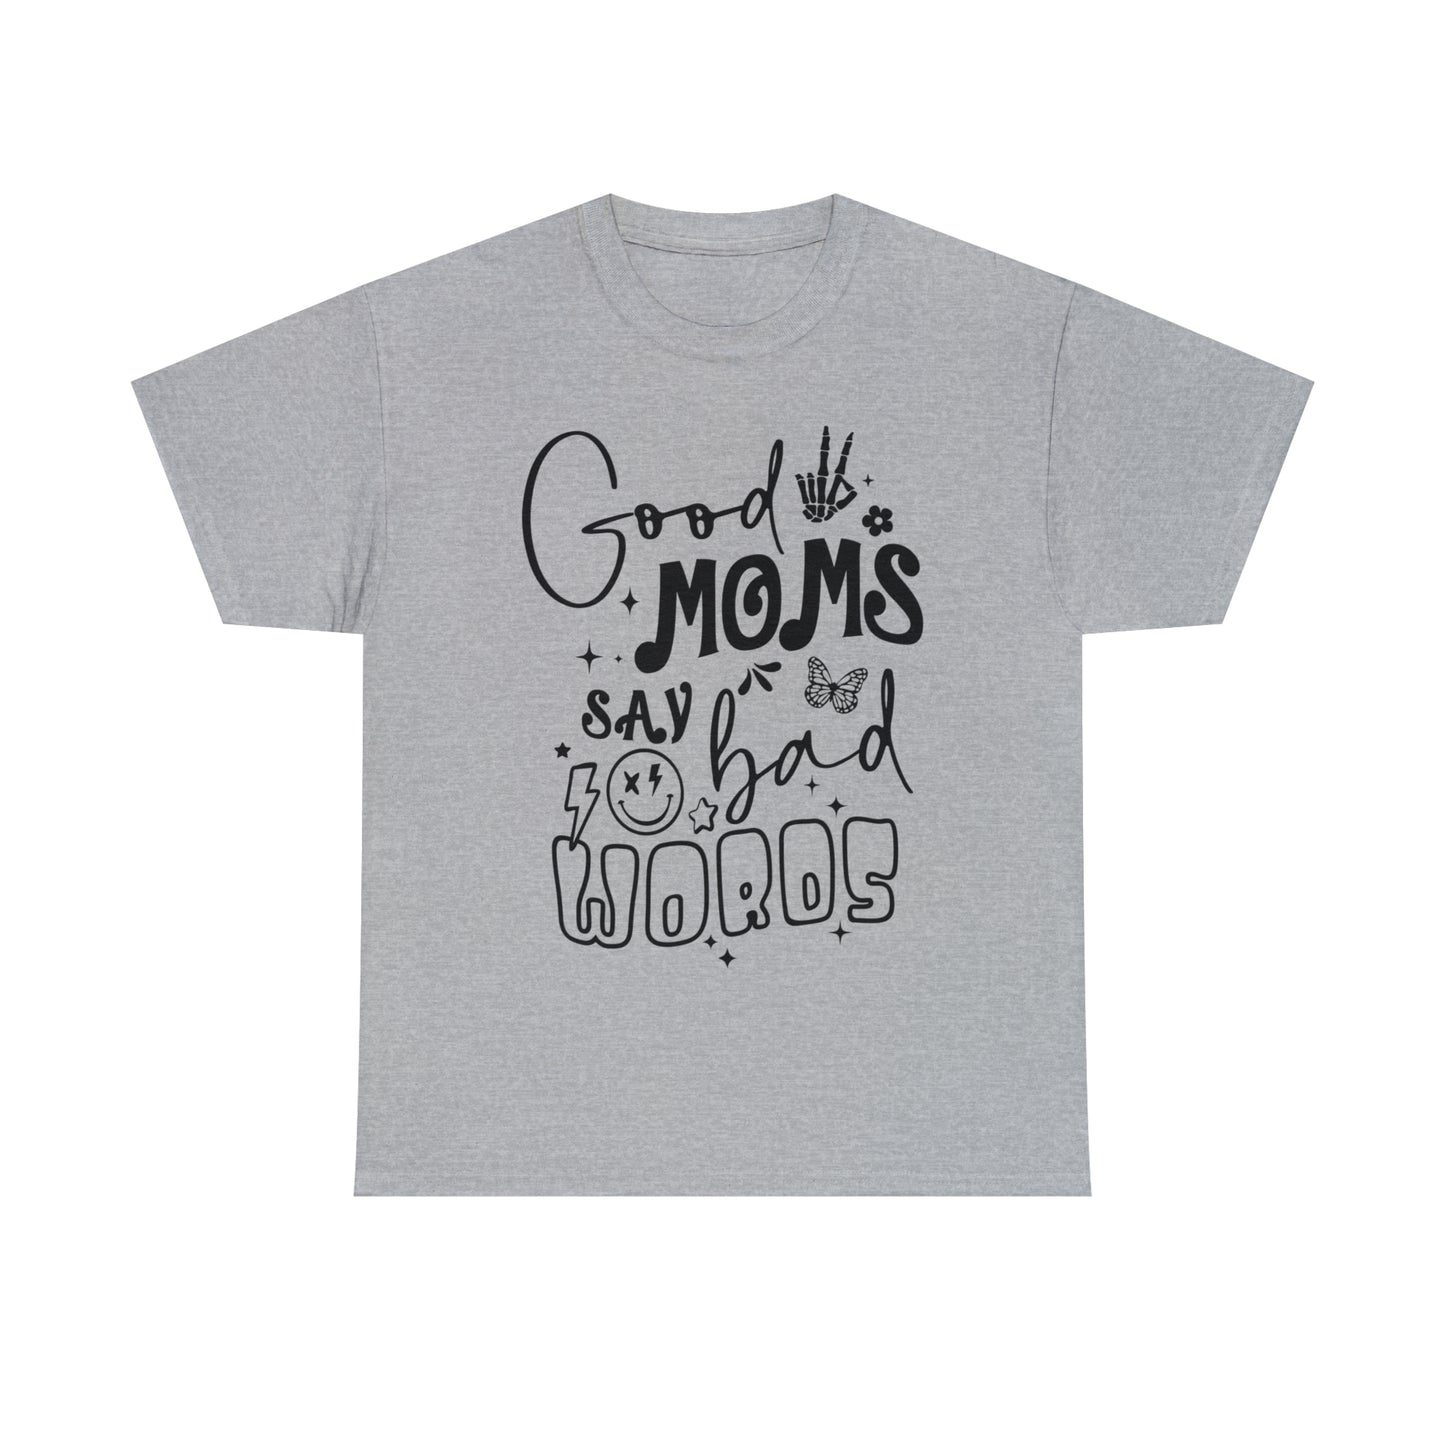 Good Moms Say Bad Words (front) - Unisex T-shirt